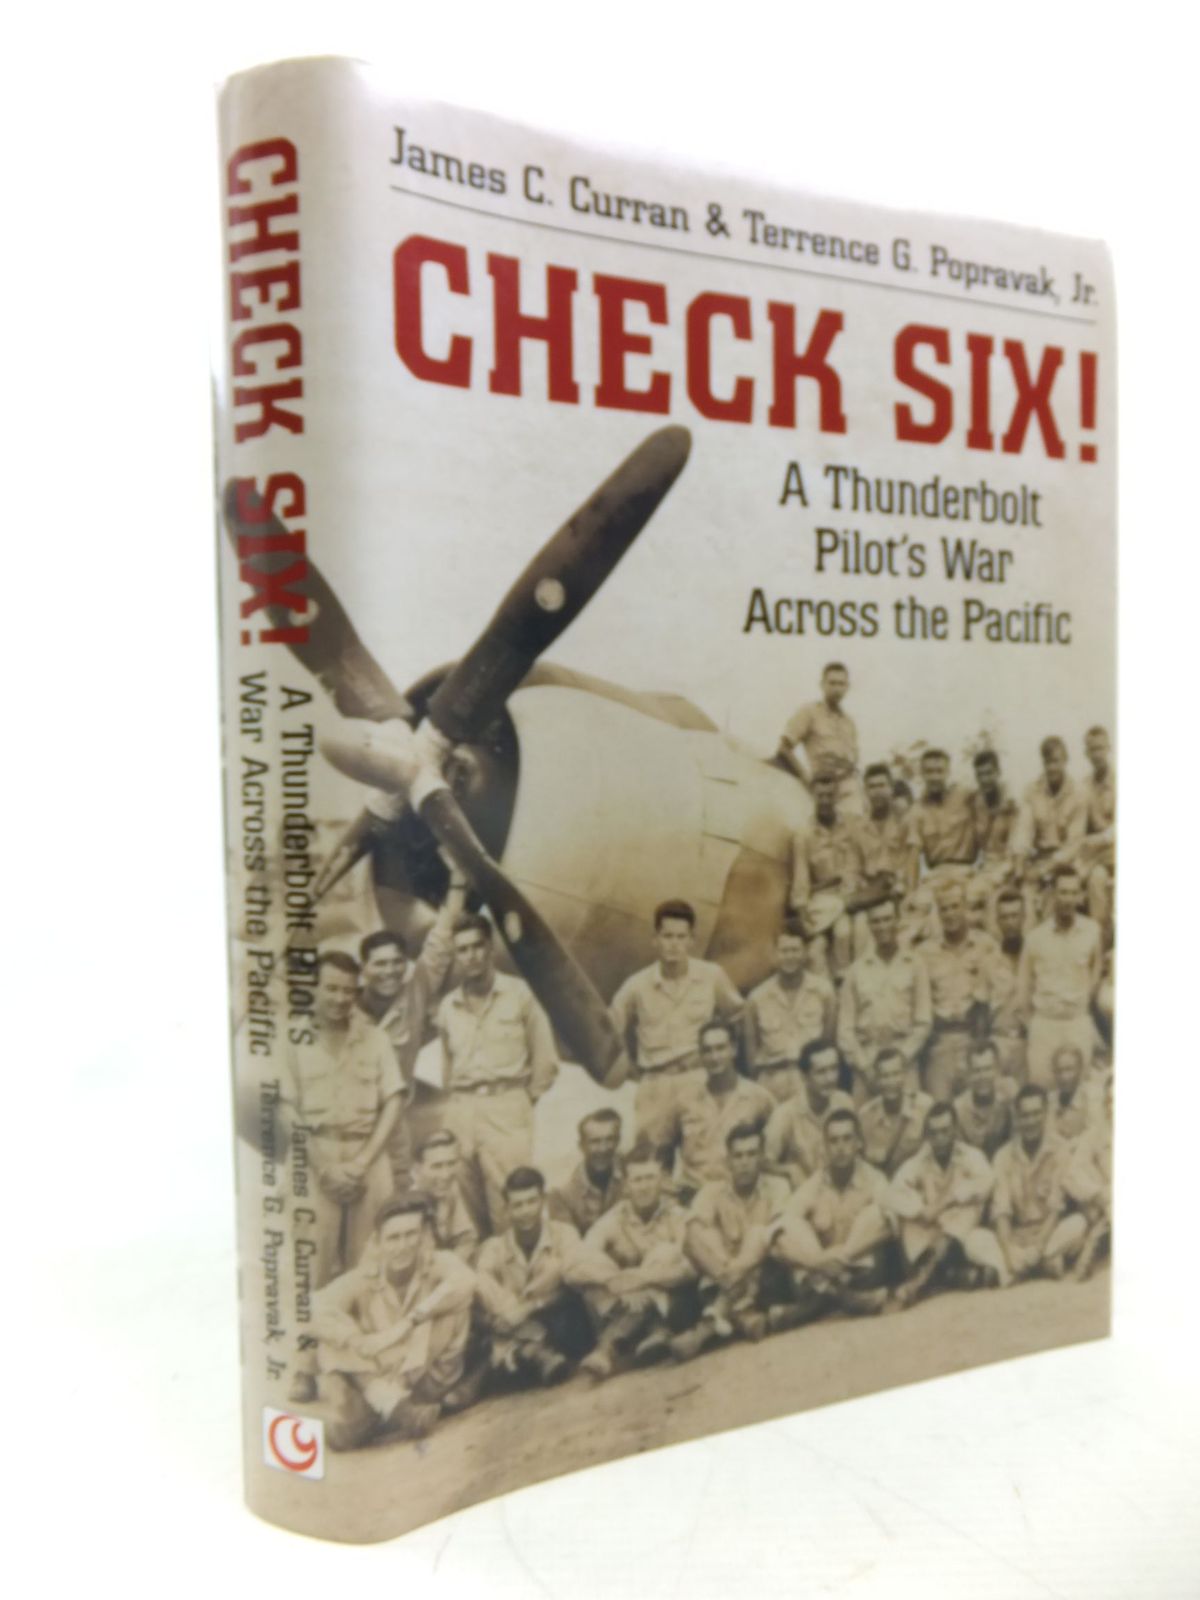 Photo of CHECK SIX! A THUNDERBOLT PILOT'S WAR ACROSS THE PACIFIC written by Curran, James C. Popravak, Terrence G. published by Casemate (STOCK CODE: 2116149)  for sale by Stella & Rose's Books